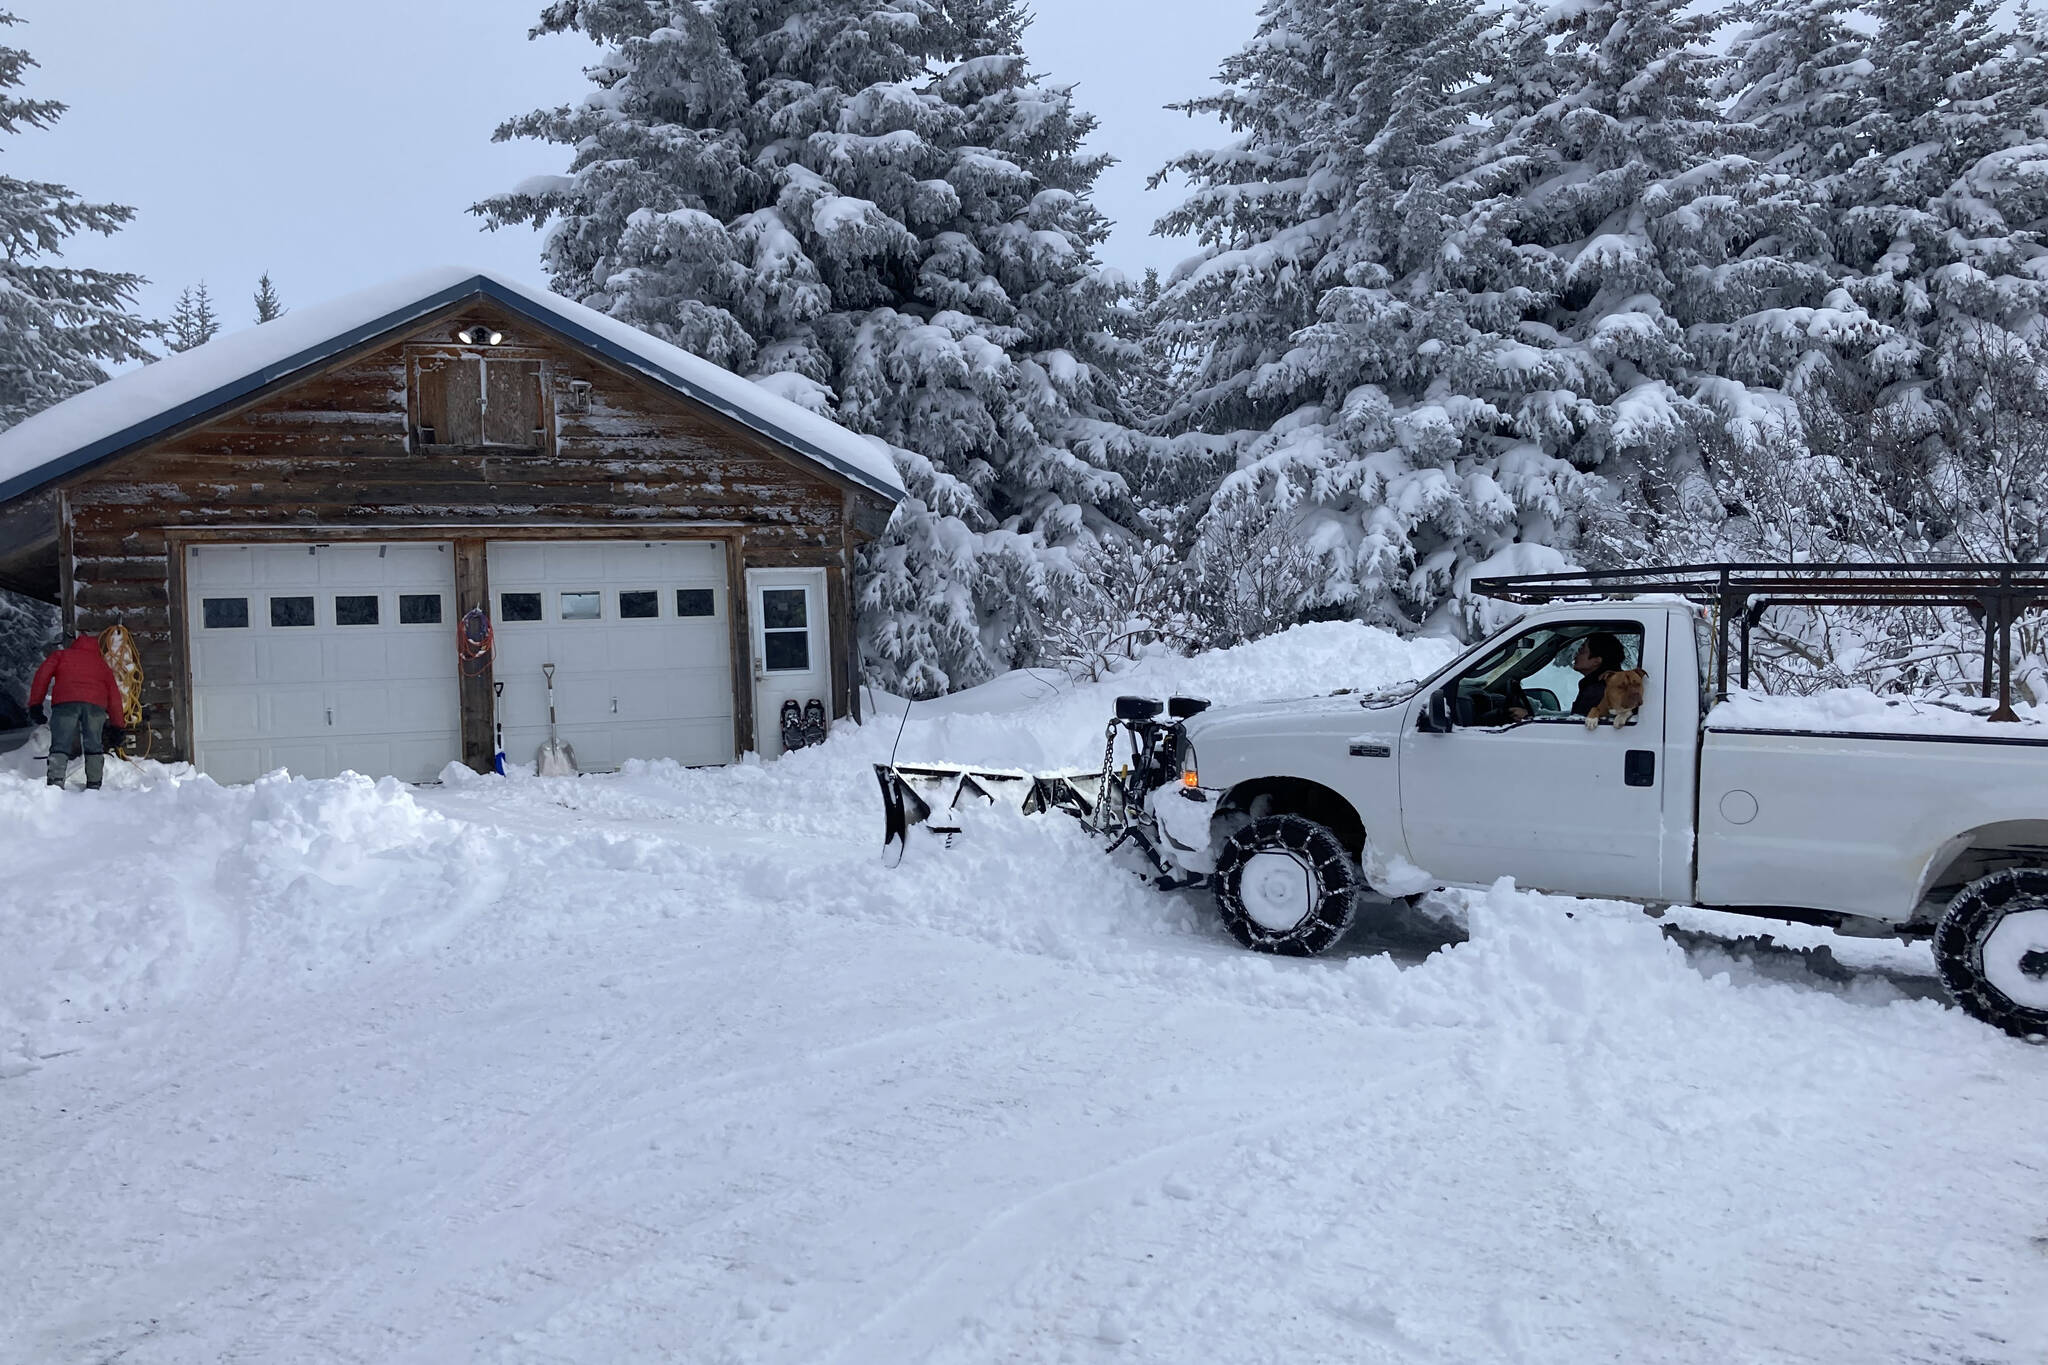 Jim Levine, left, watches as his Diamond Ridge driveway gets plowed on Monday, Nov. 29, 2021, near Homer, Alaska. Over the Thanksgiving Day weekend, some areas of the southern Kenai Peninsula got up to 3 feet of snow. The weekend forecast calls for clear and cold on Friday, with a 70% chance of snow on Sunday, (Photo by Michael Armstrong/Homer News)